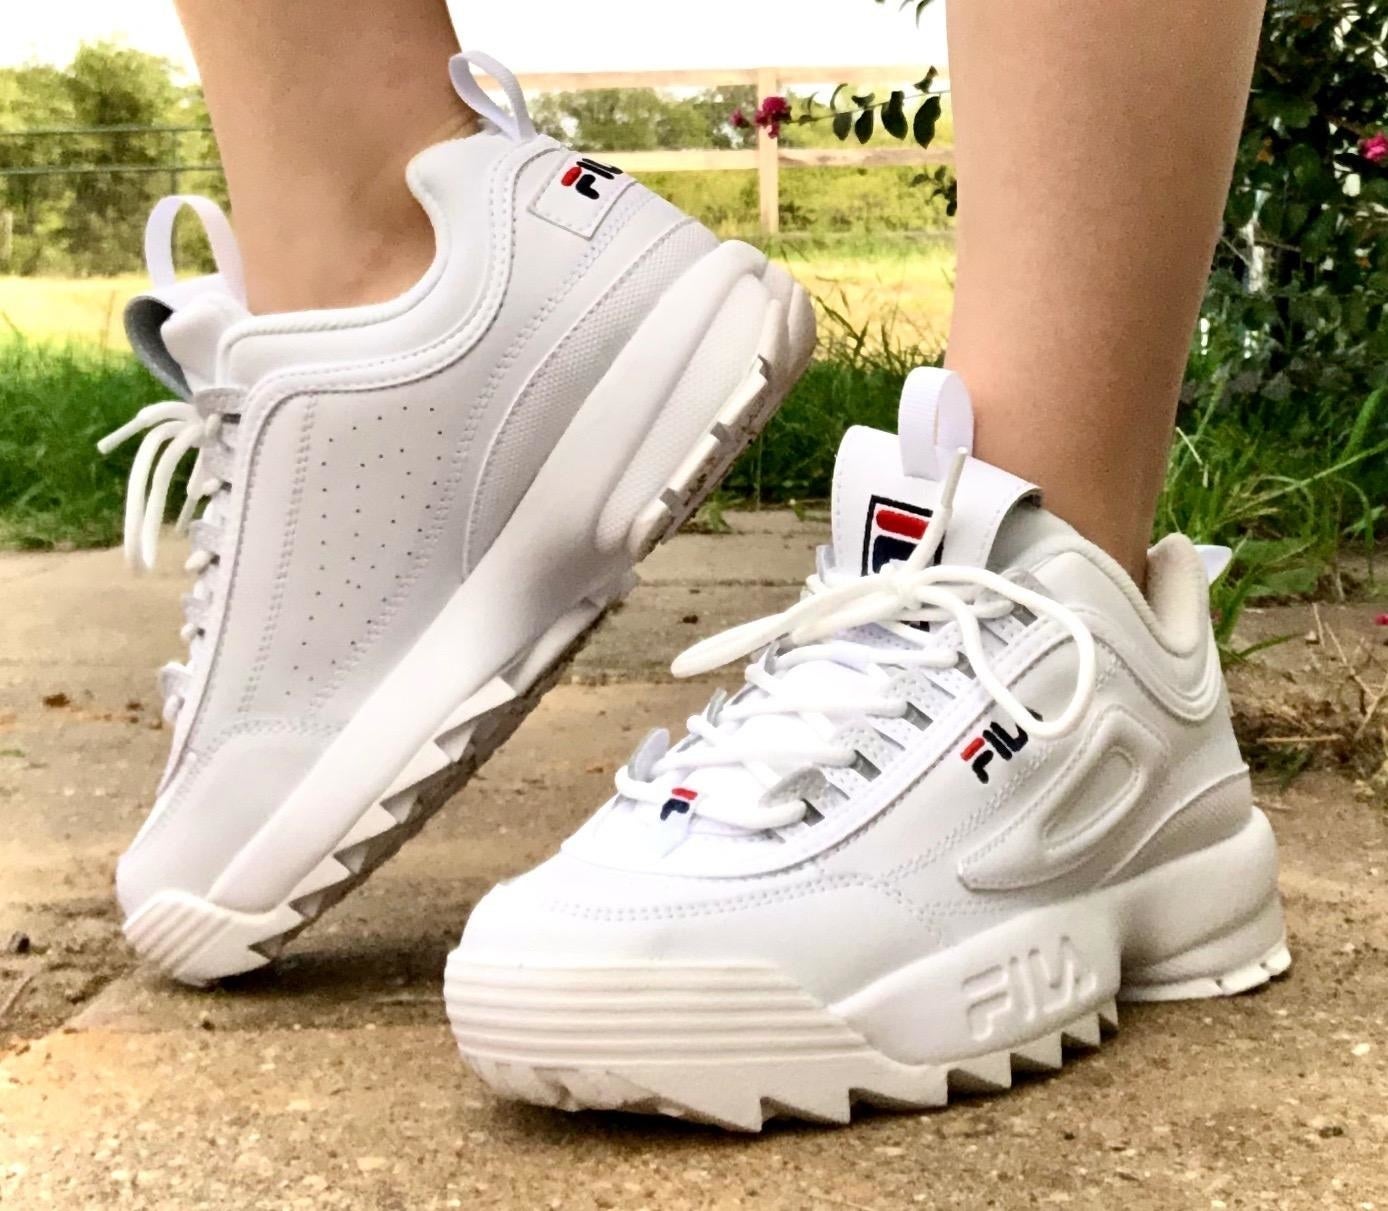 reviewer photo of them wearing white Fila platform sneakers